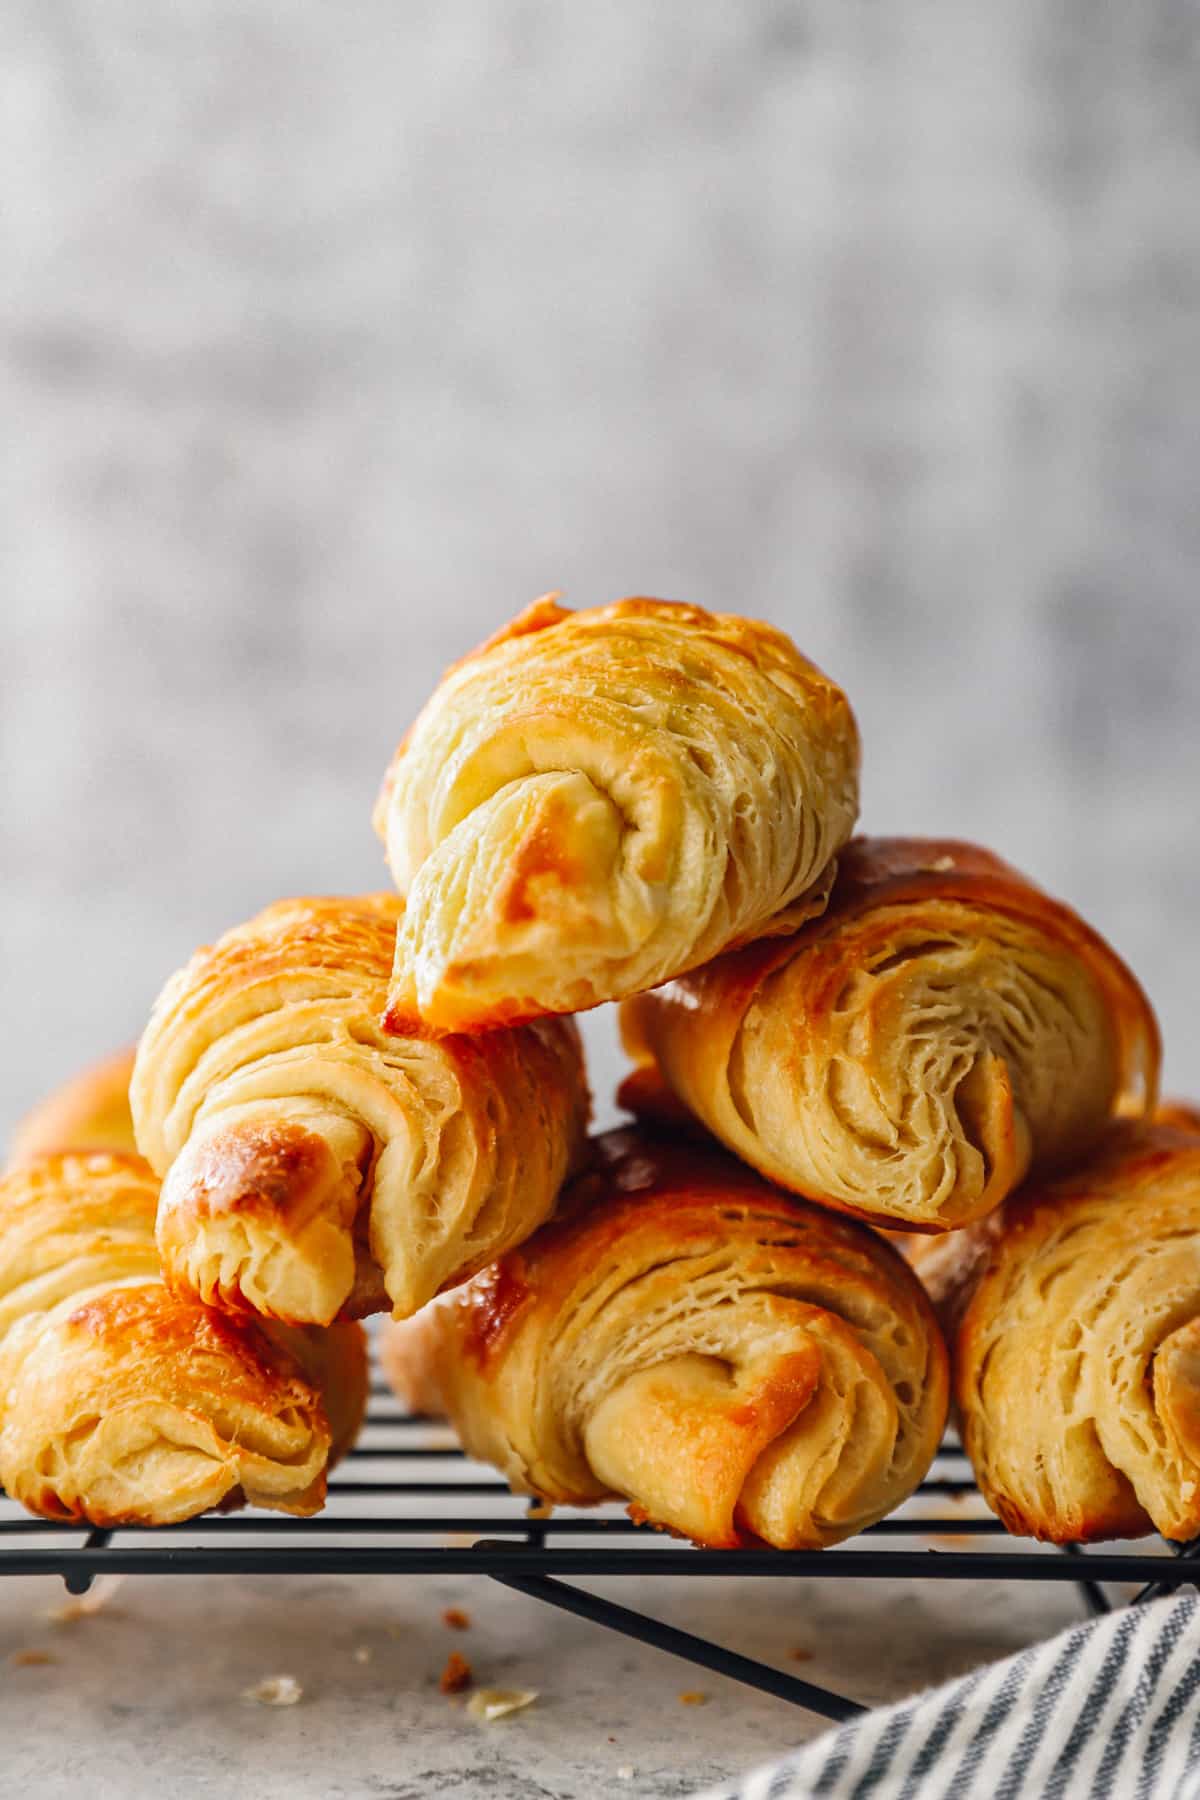 a pyramid of 6 croissants on a wire rack.